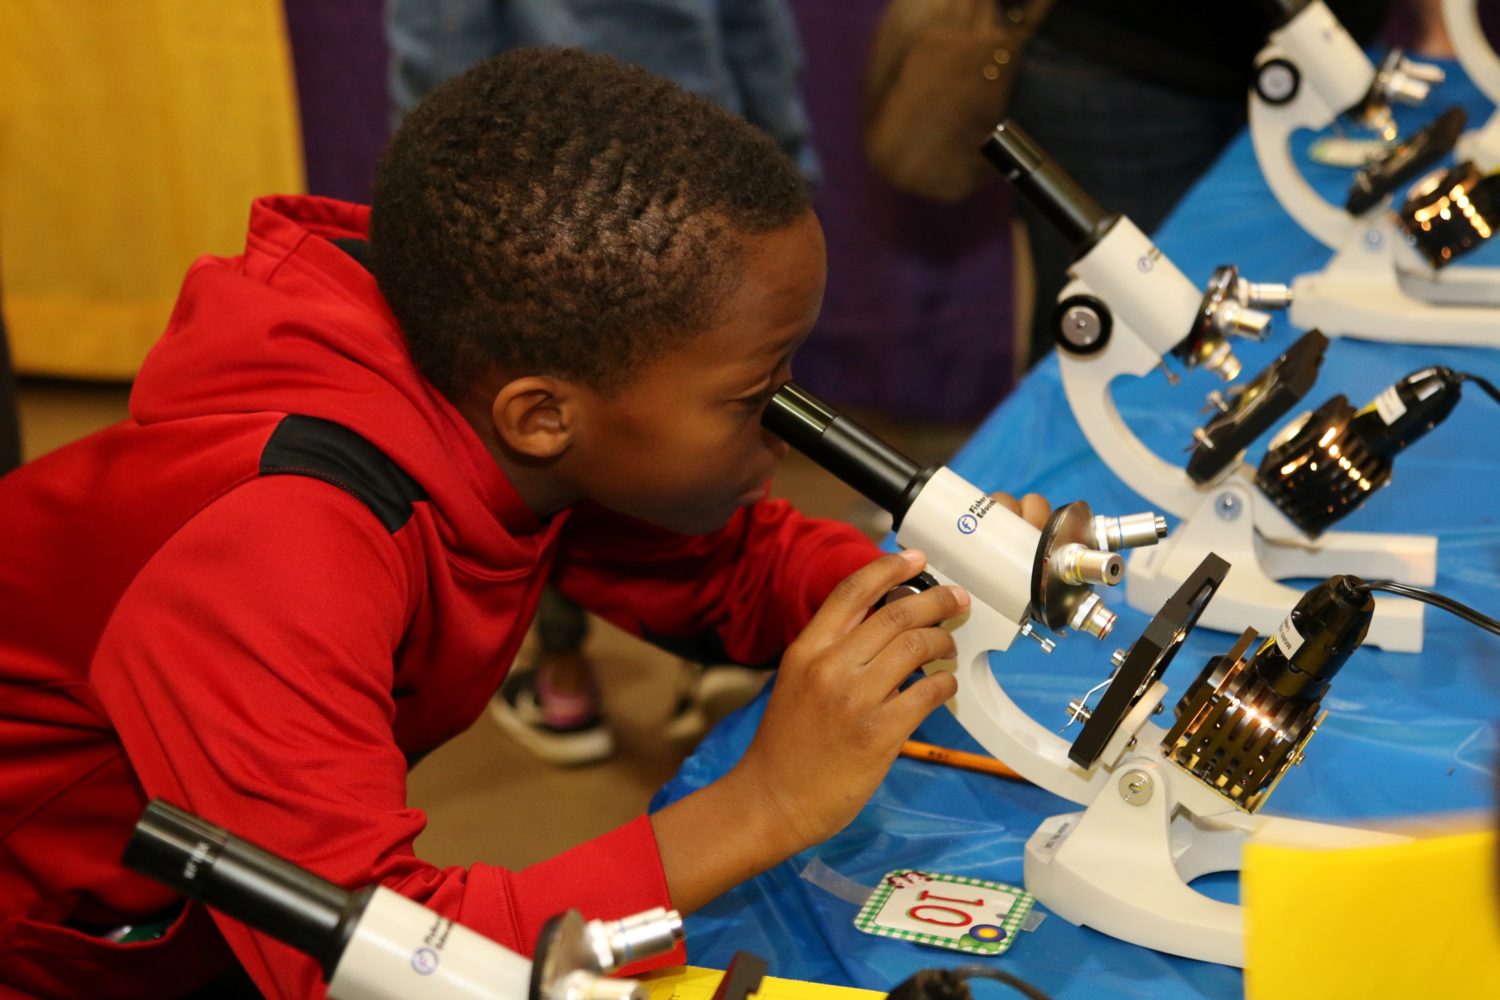 An attendee enjoys one of the campus booths at the Sci://Tech Elementary Science Festival.